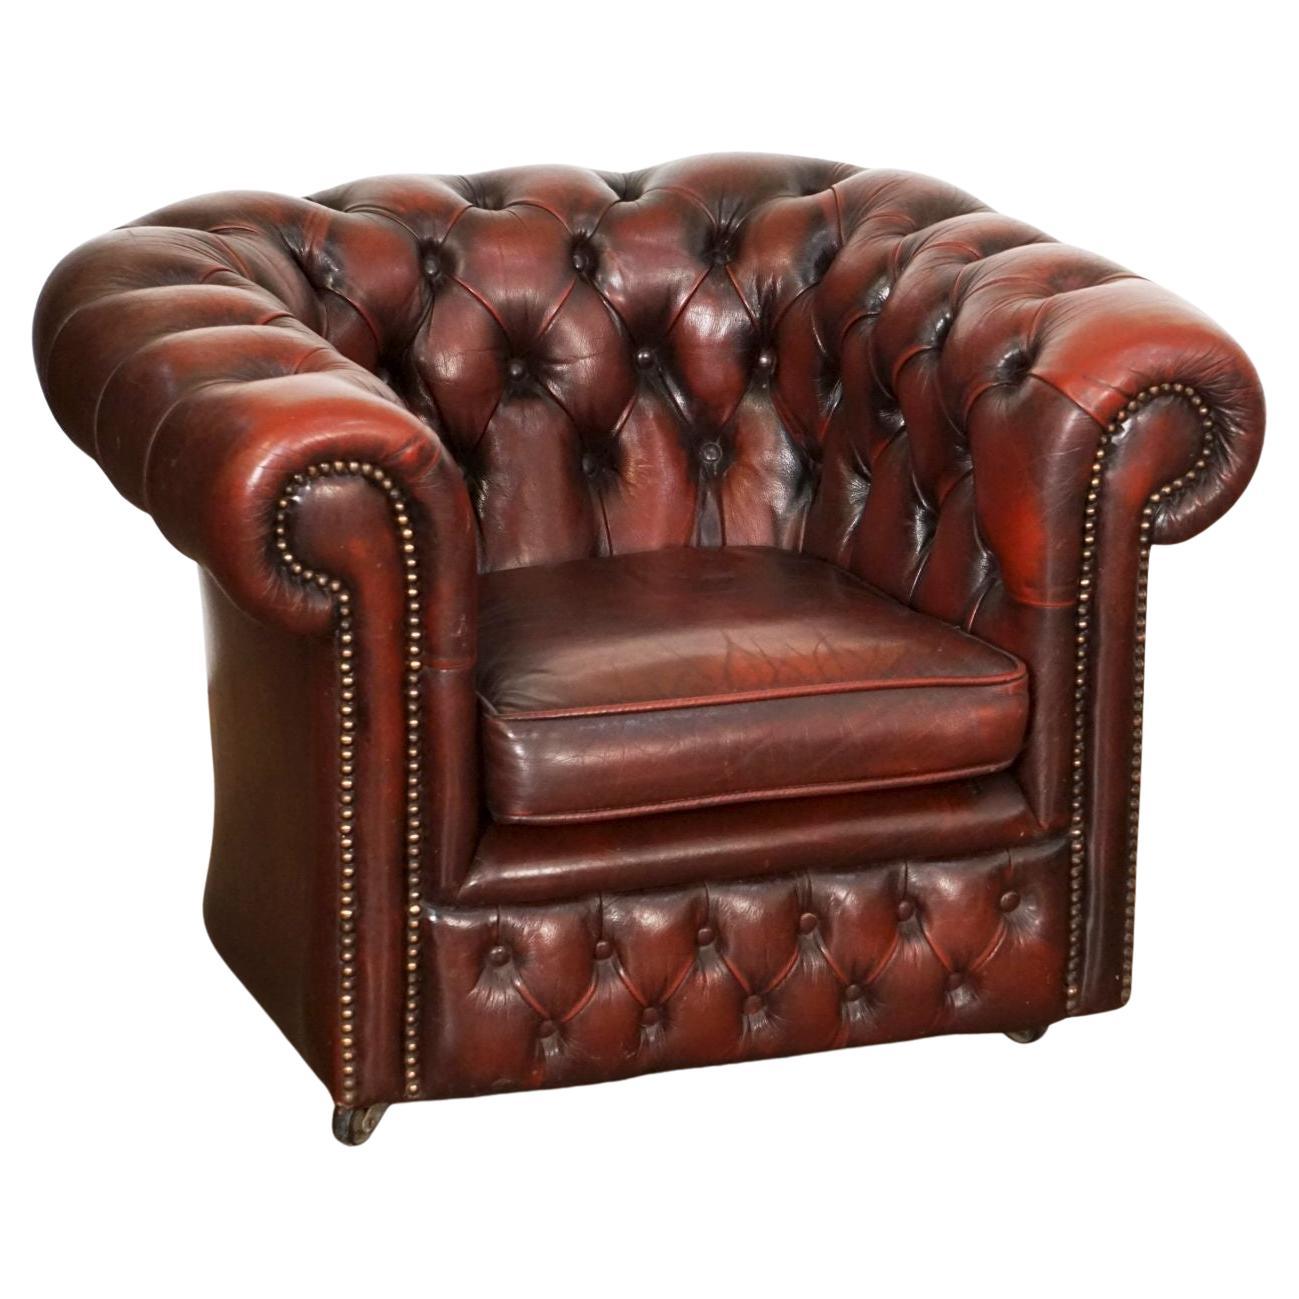 Child's Leather Chesterfield Club Chair from England For Sale